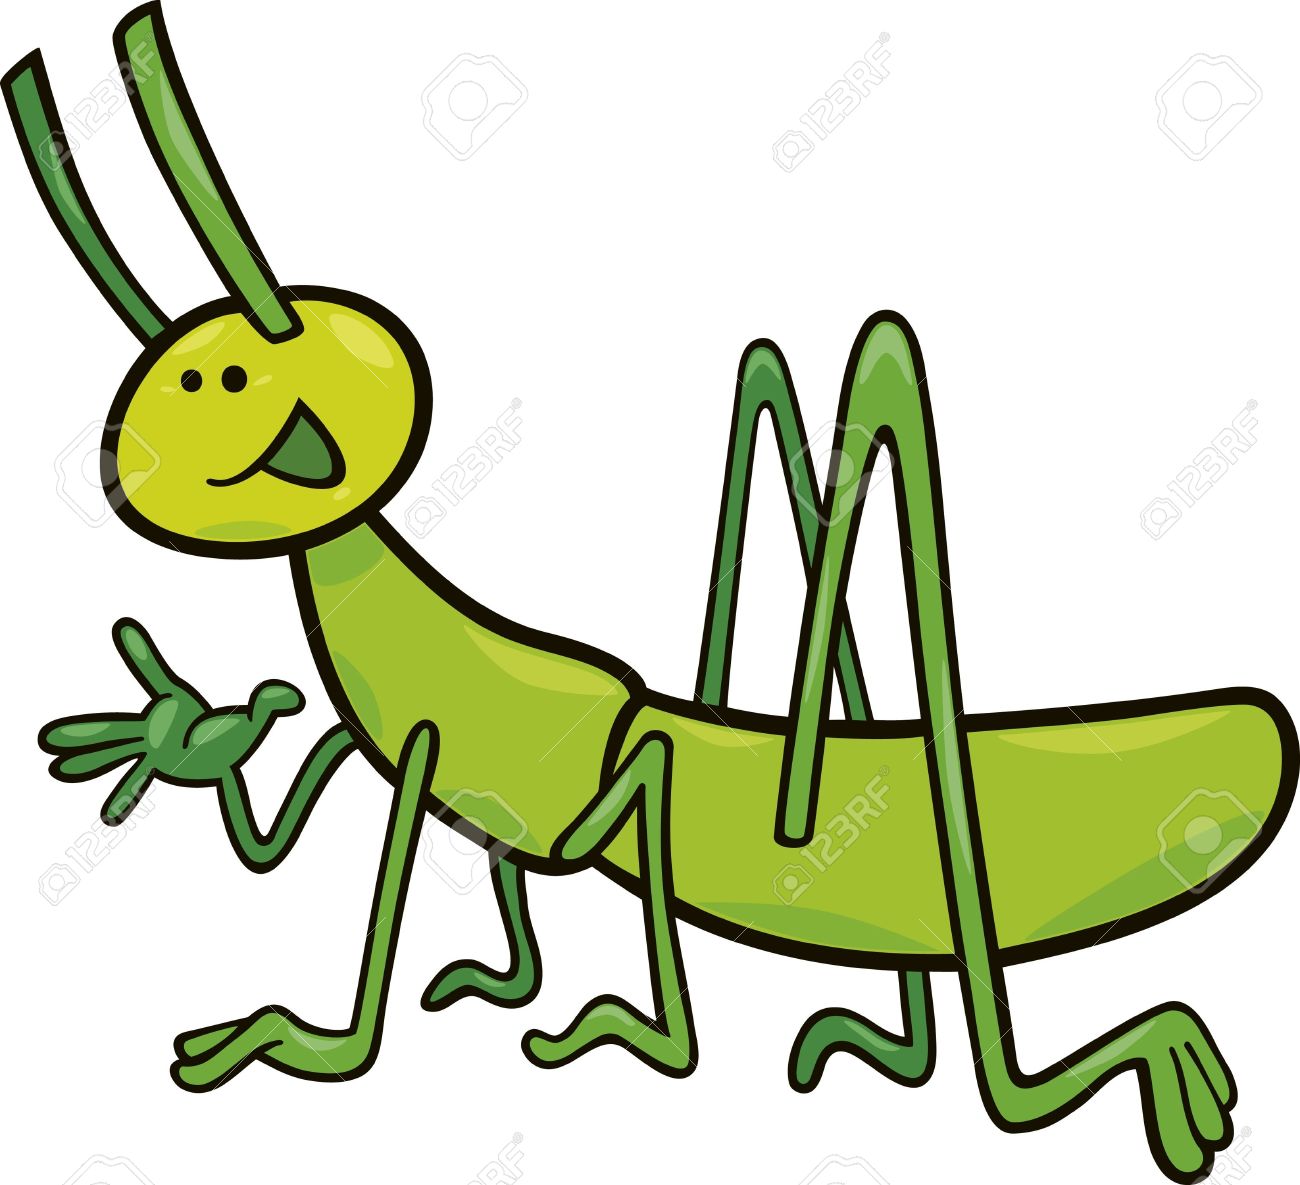 Cricket insect clipart.